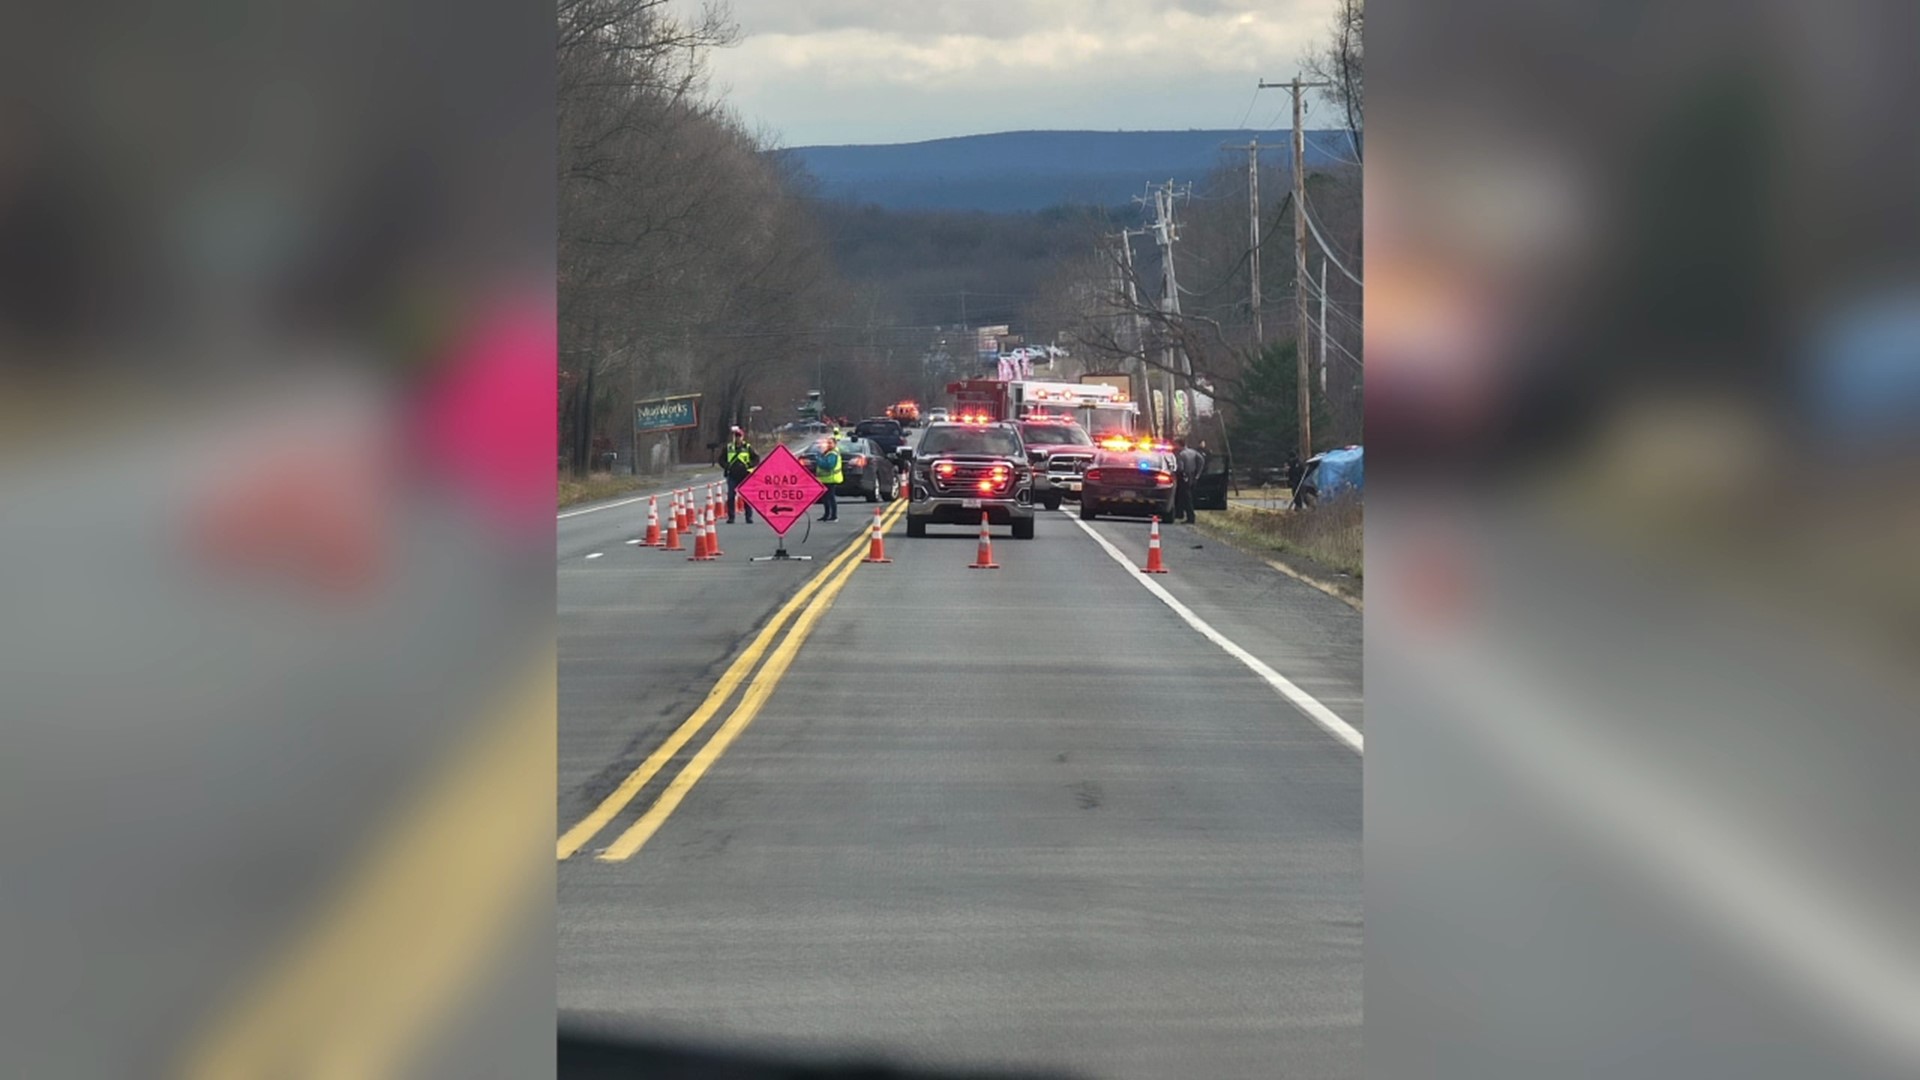 The crash happened around 2 p.m. Saturday along Route 115 and Log Cabin Lane in Chestnuthill Township.